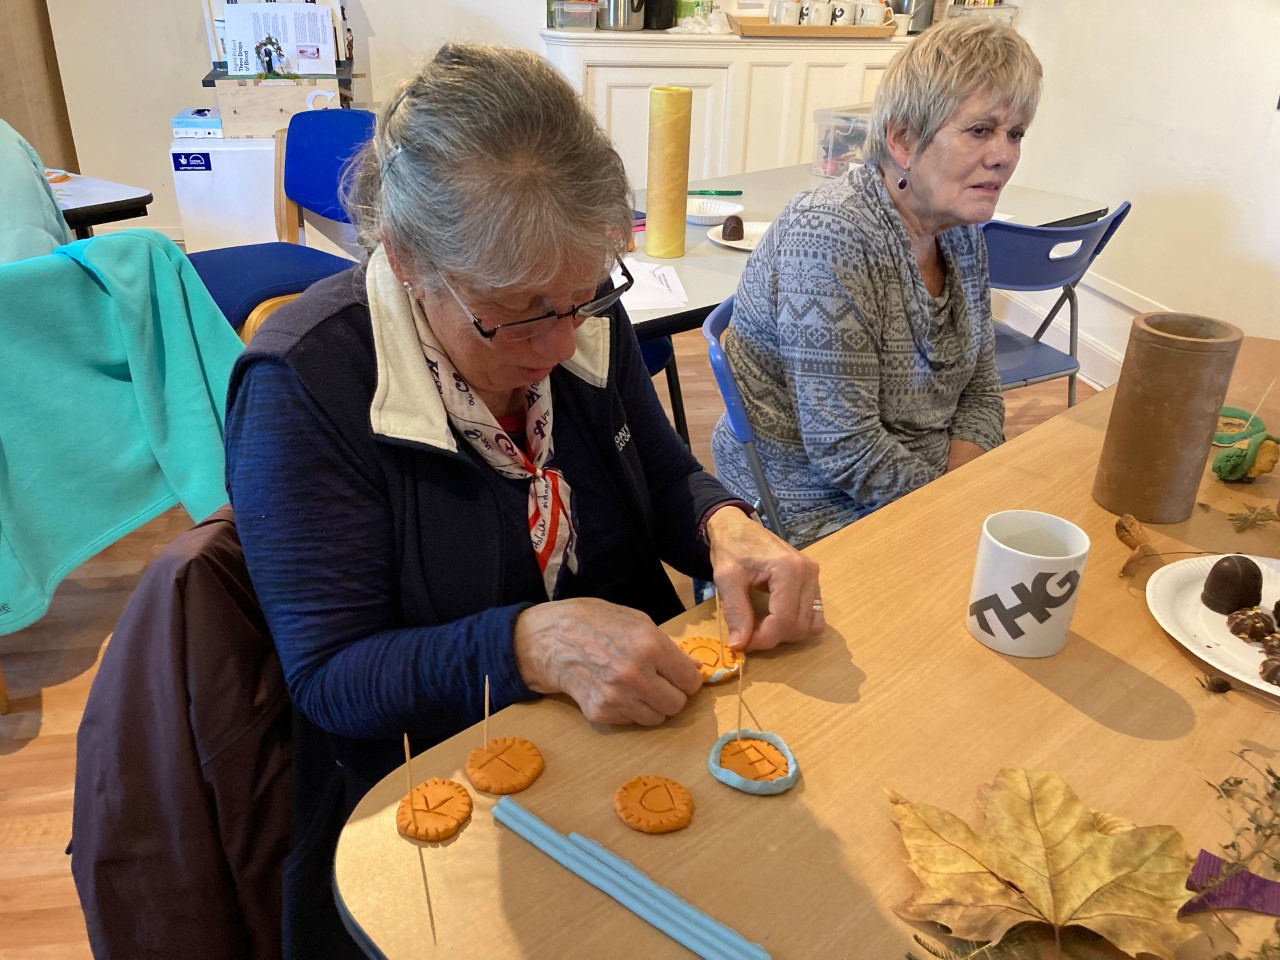 Carers Vera Reene and Laura Barnden working on their decorations (Credit: Winnie Cameron)